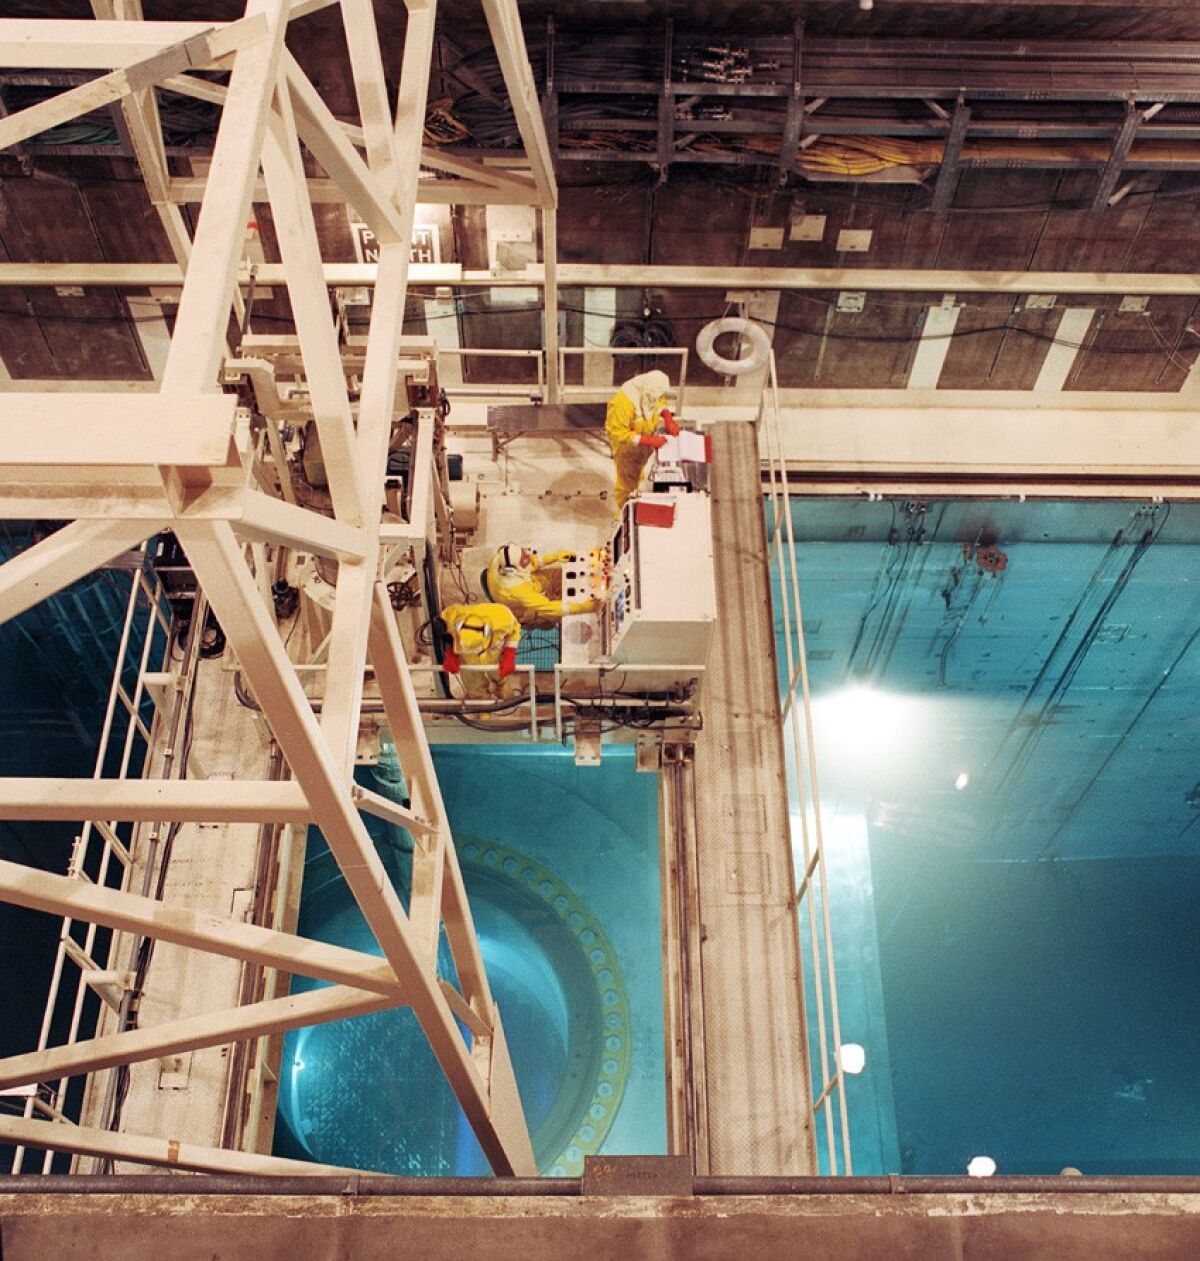 Water fills a reactor cavity as workers in yellow protective suits stand on a platform above it